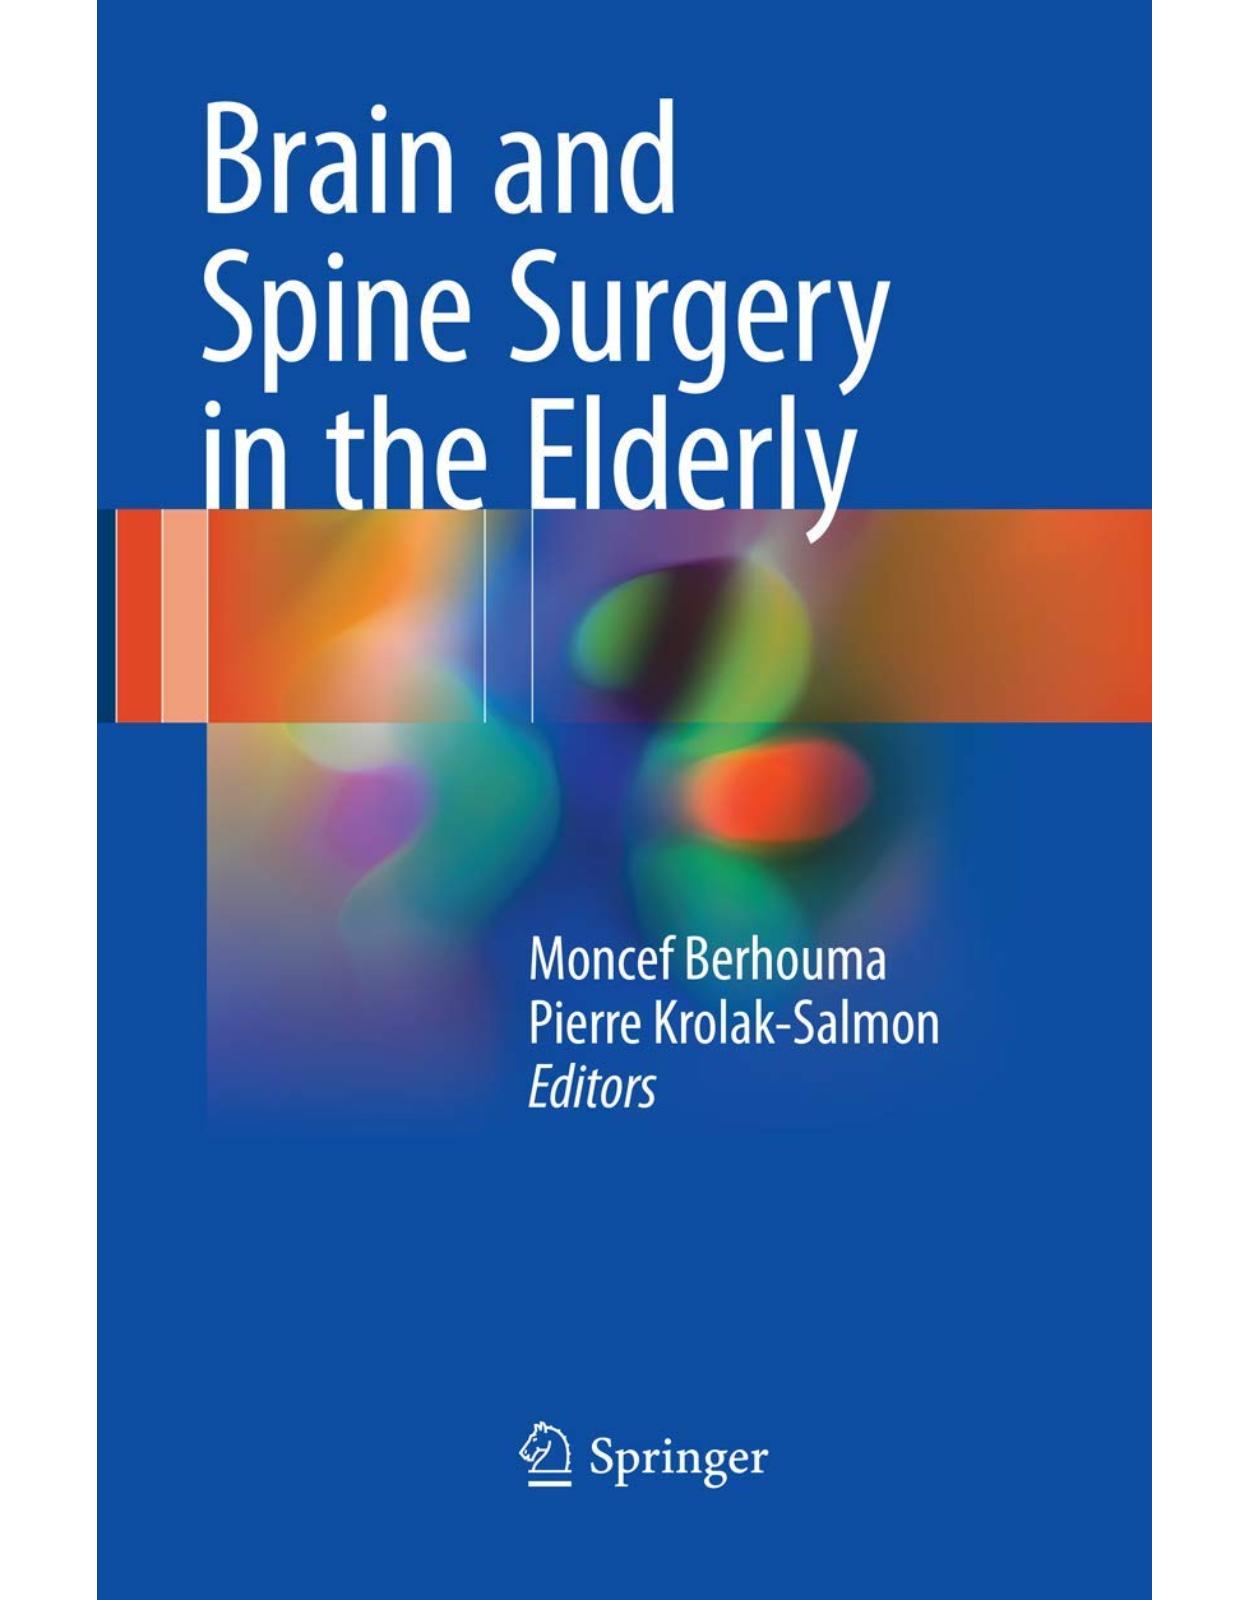 Brain and Spine Surgery in the Elderly